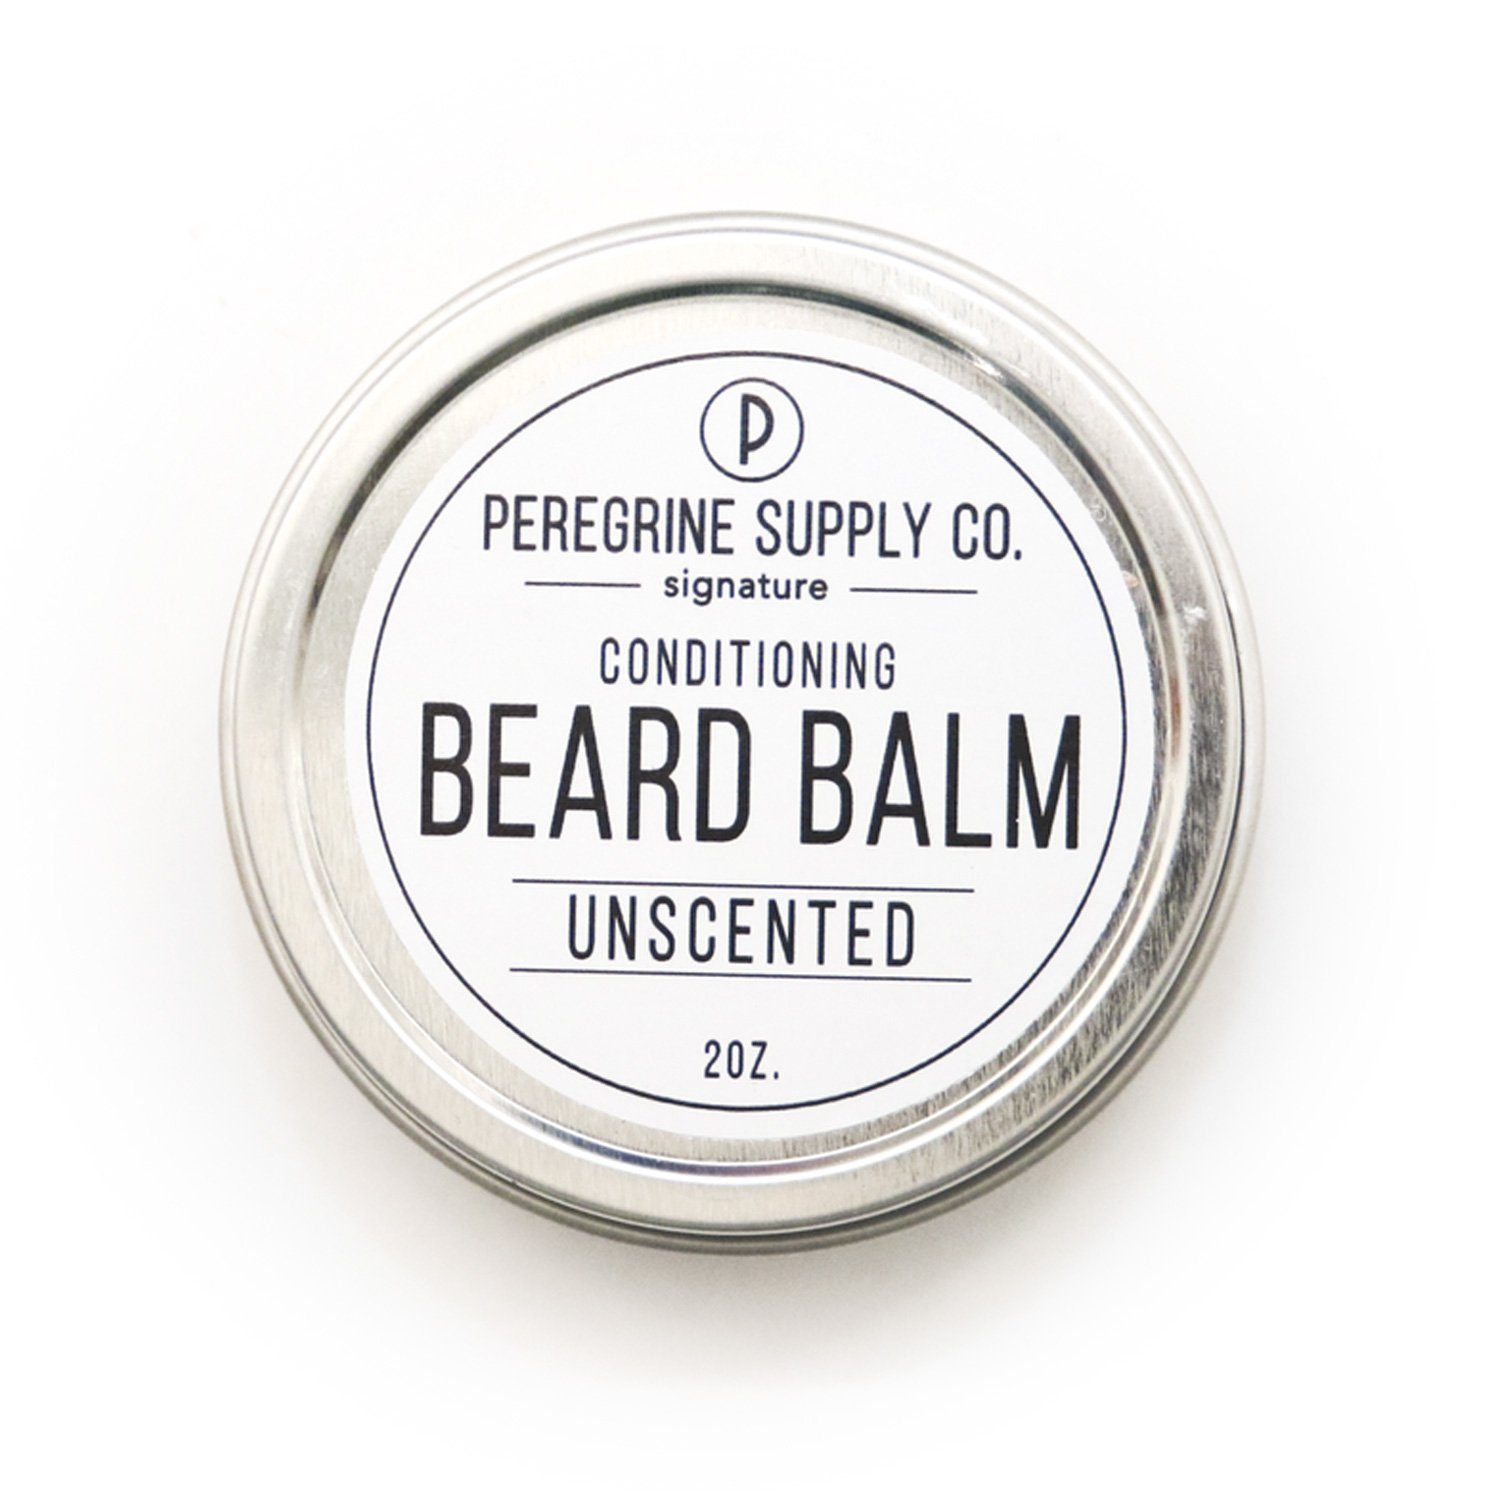 Peregrine Supply Co. Unscented Beard Balm Grooming Supplies Peregrine Supply Co 